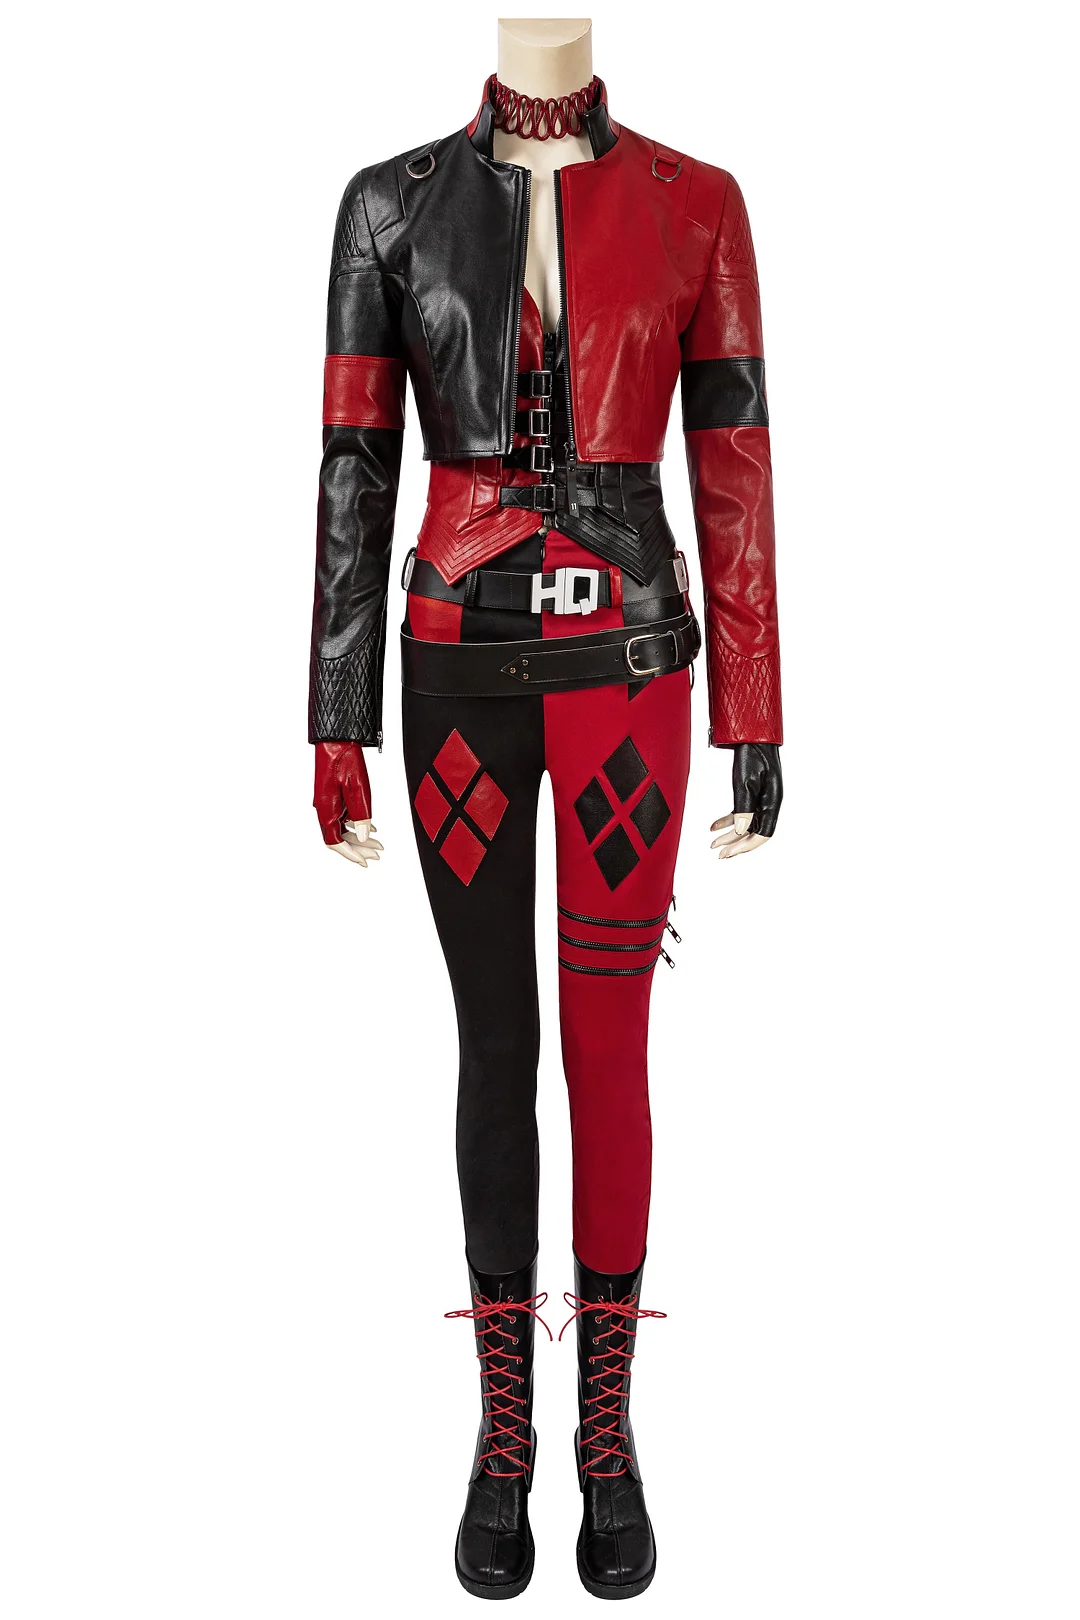 Injustice Harley Quinn Cosplay halloween Costume Injustice 2 Gods Among Us outfit